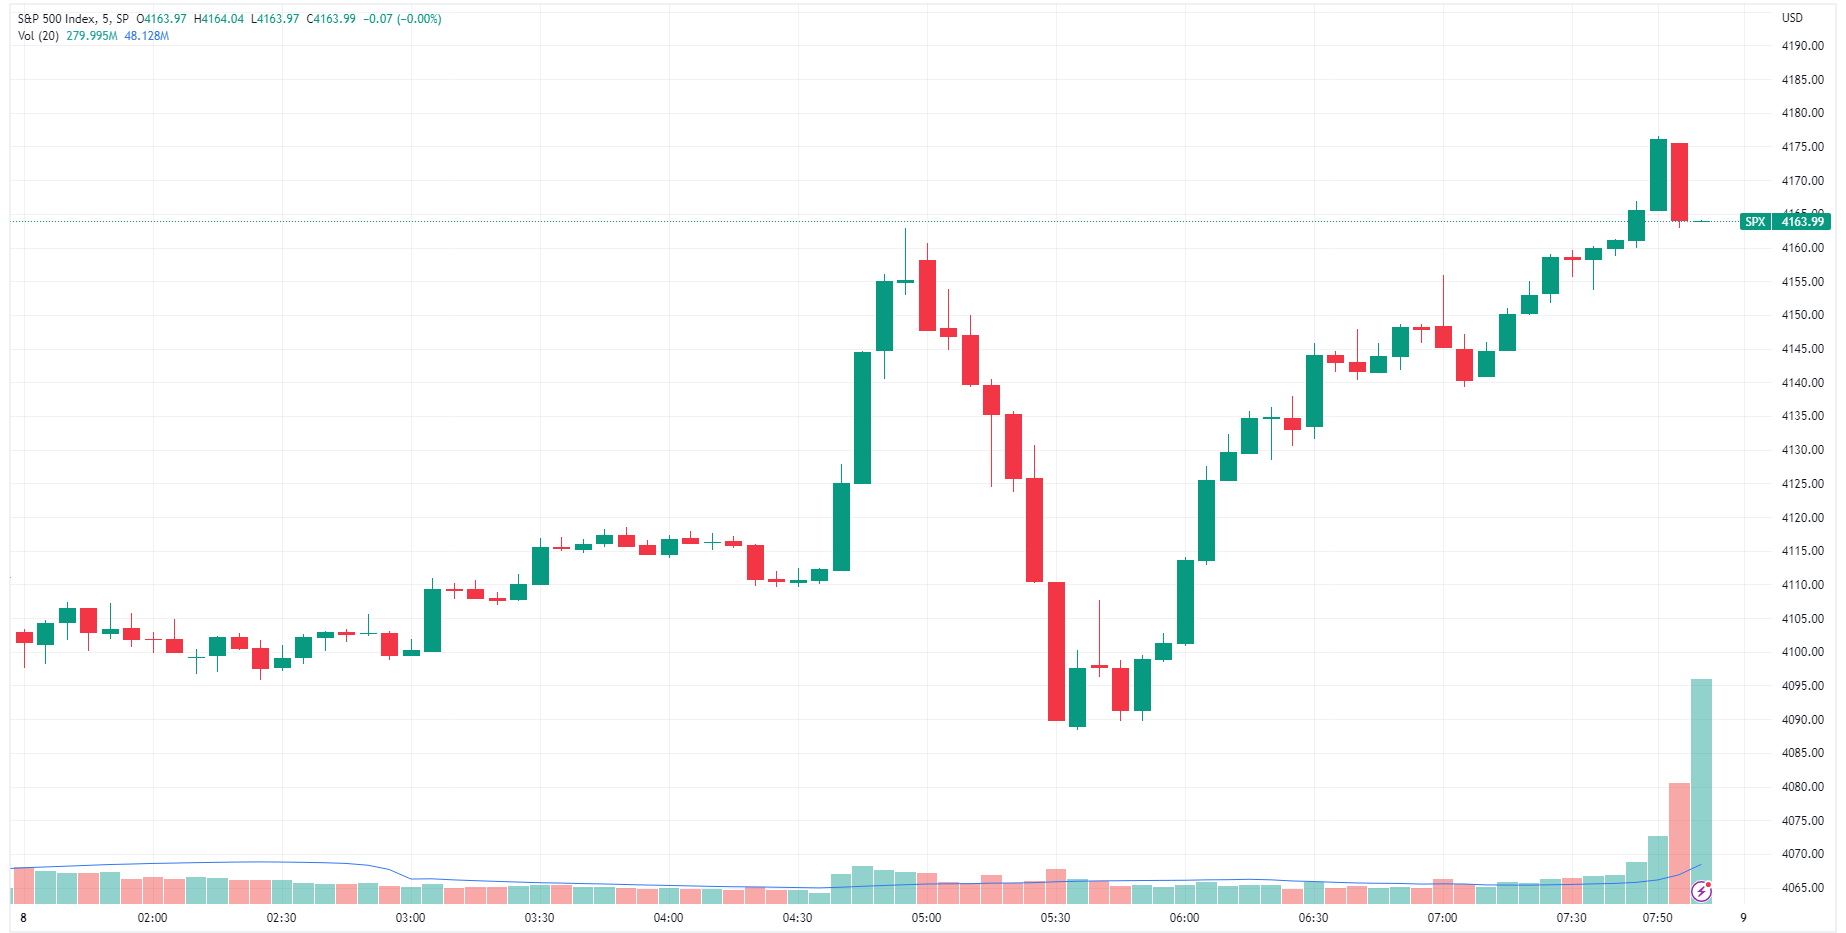 S&P 500 nosedives and bounces after Powell’s speech, which offered nothing new  (Source: TradingView)